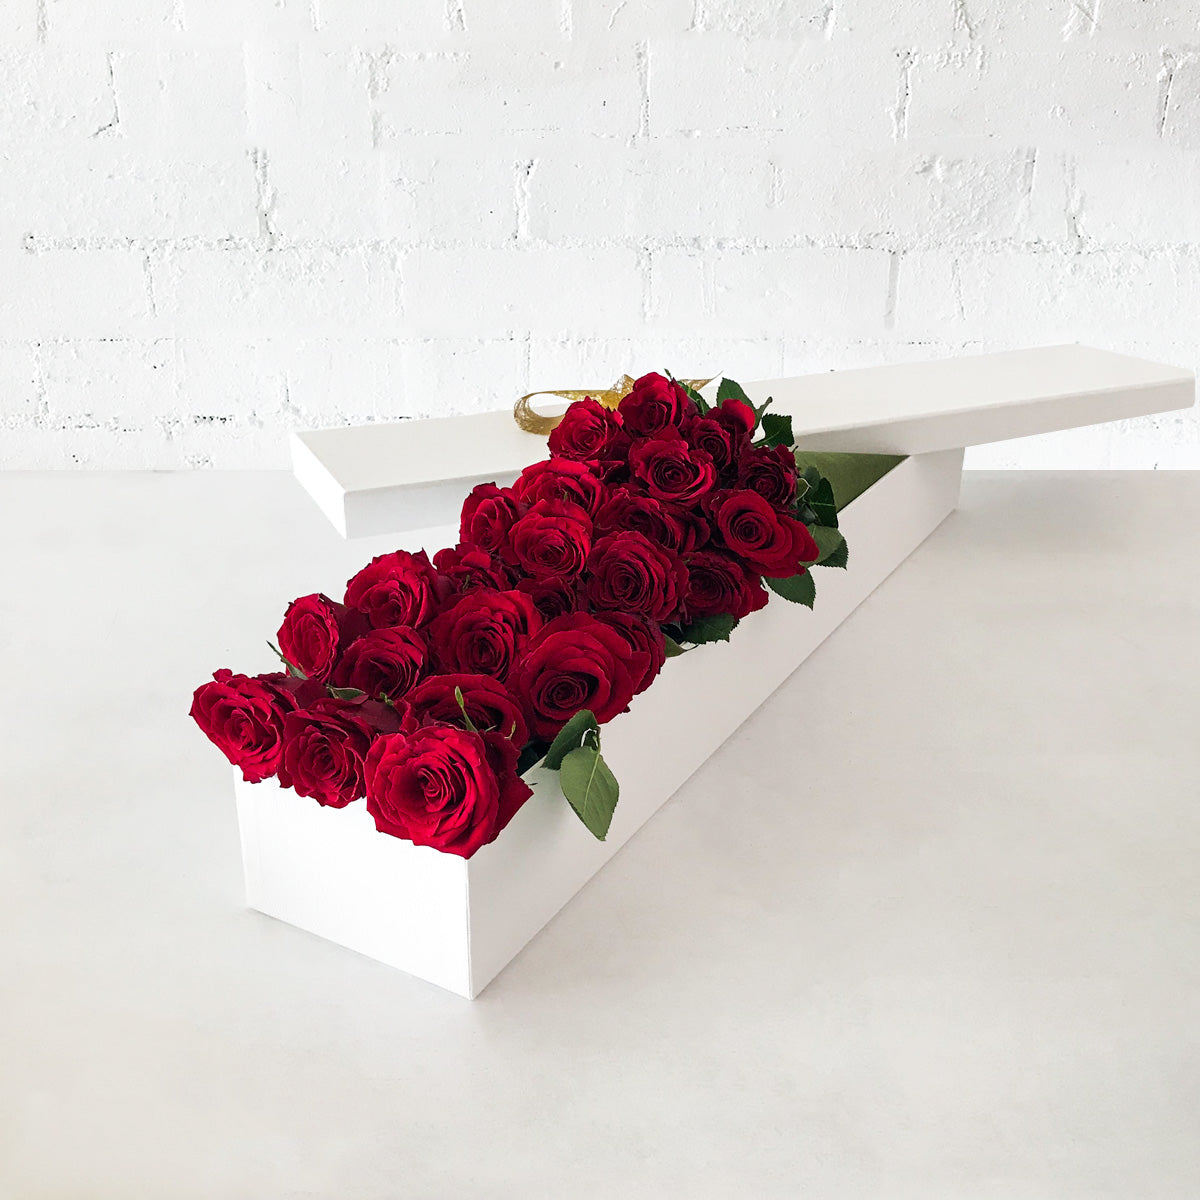 Buy 36 Red Roses for Valentines Day